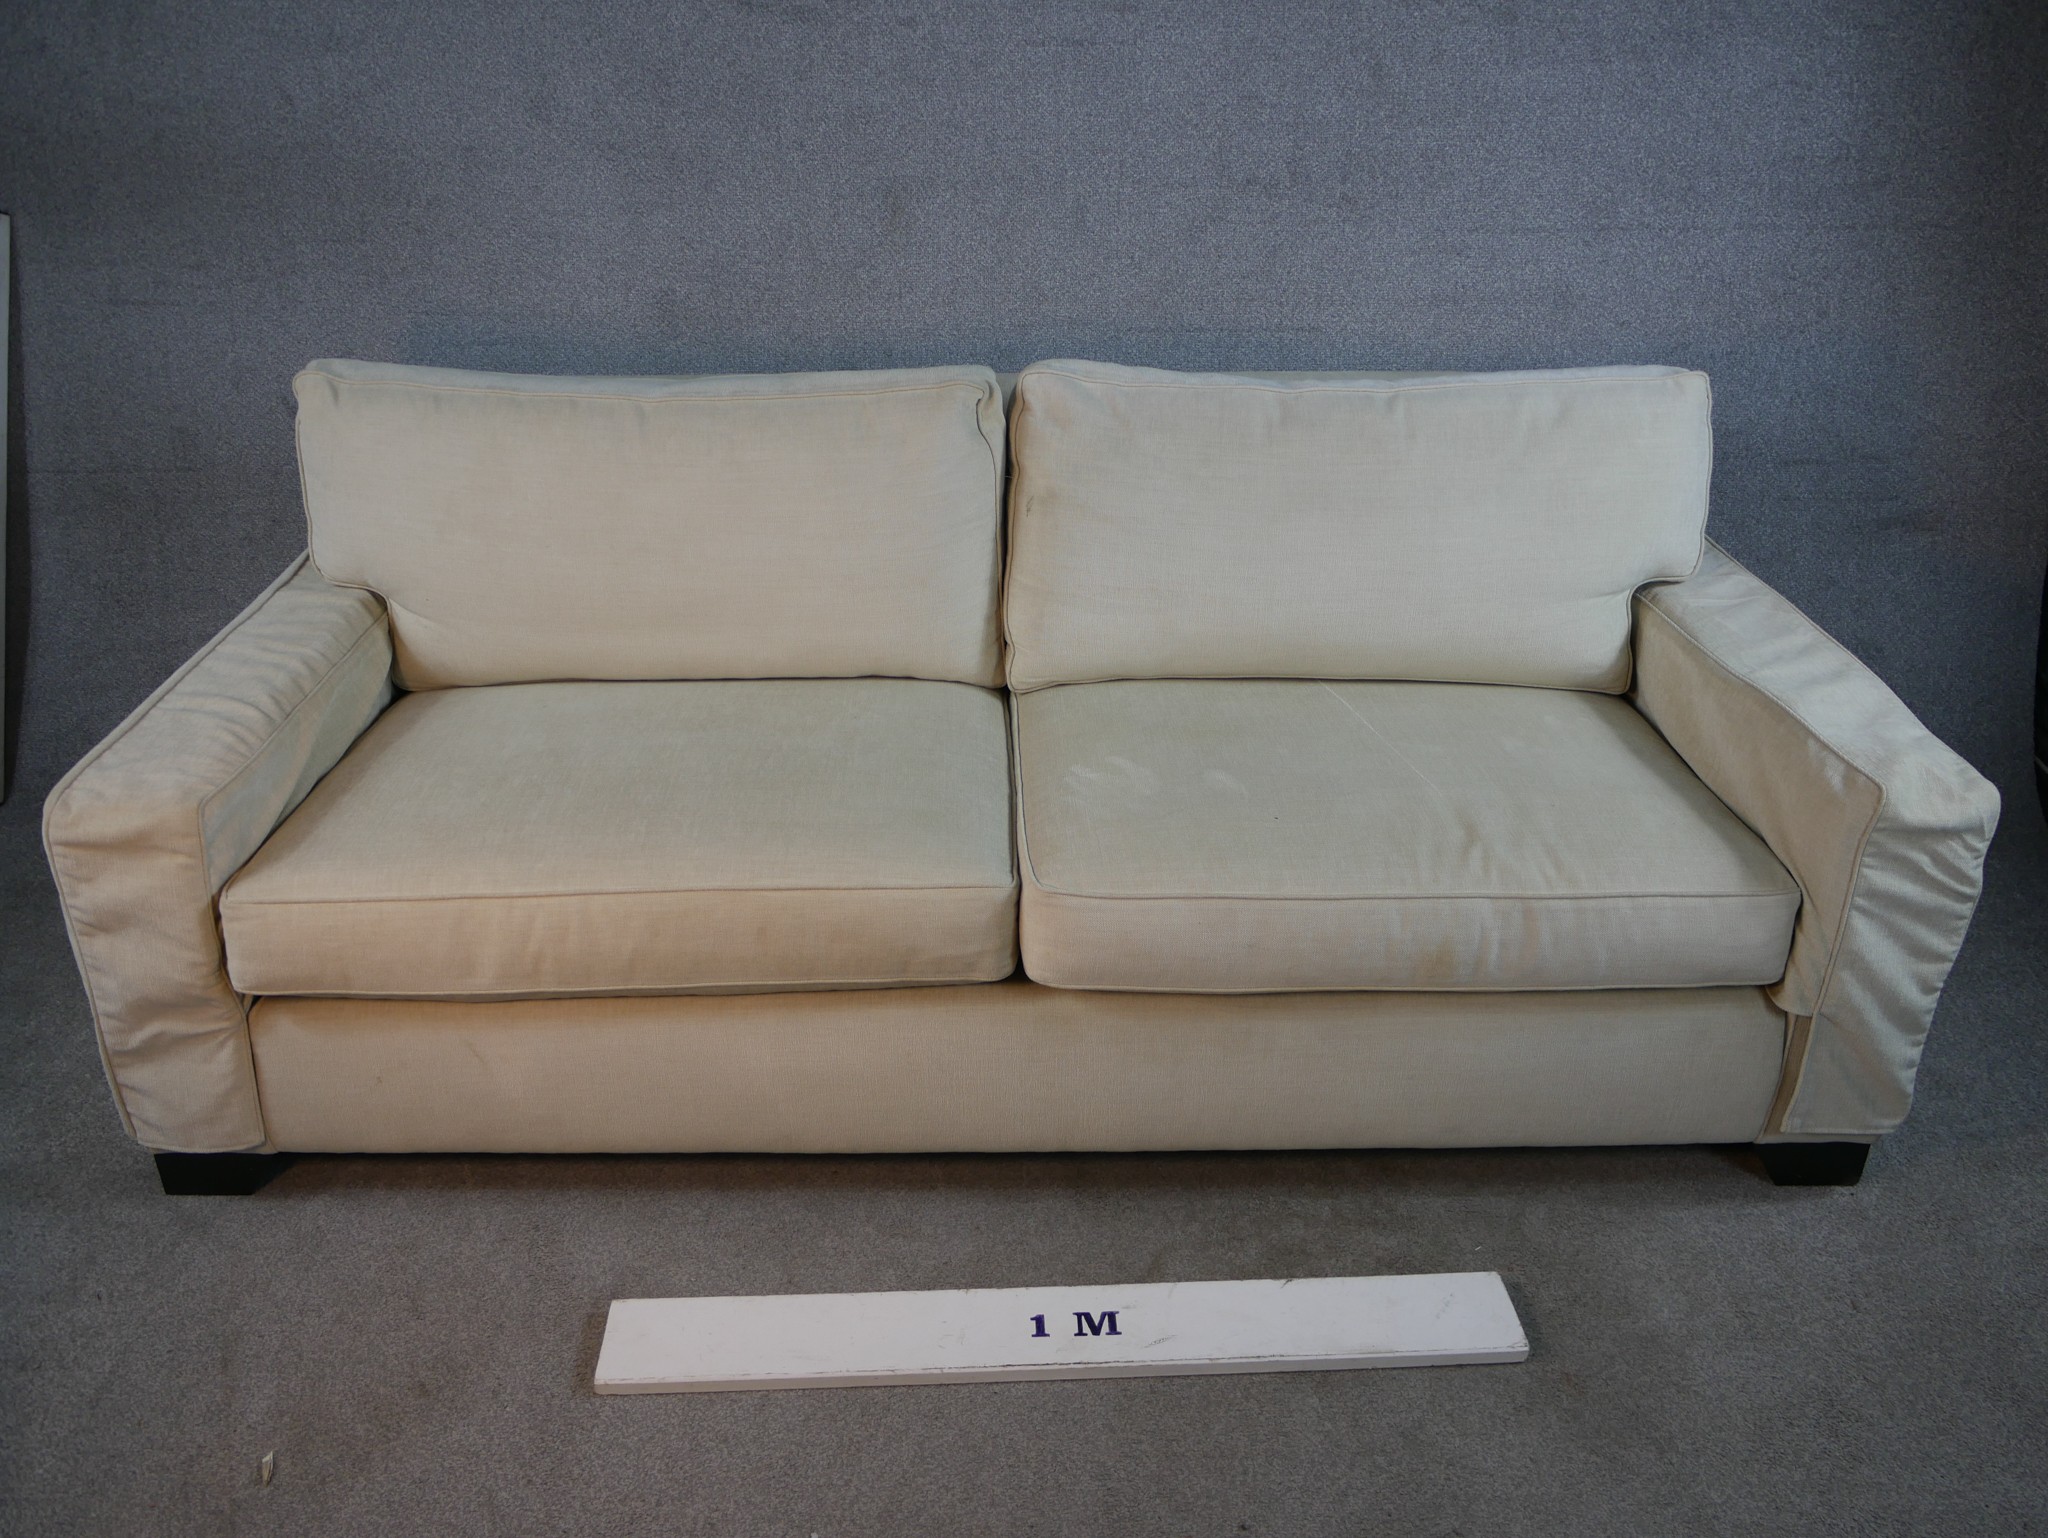 A contemporary Kingcome two seater cream upholstered sofa raised on block feet. H.84 W.120 D.100cm. - Image 3 of 7